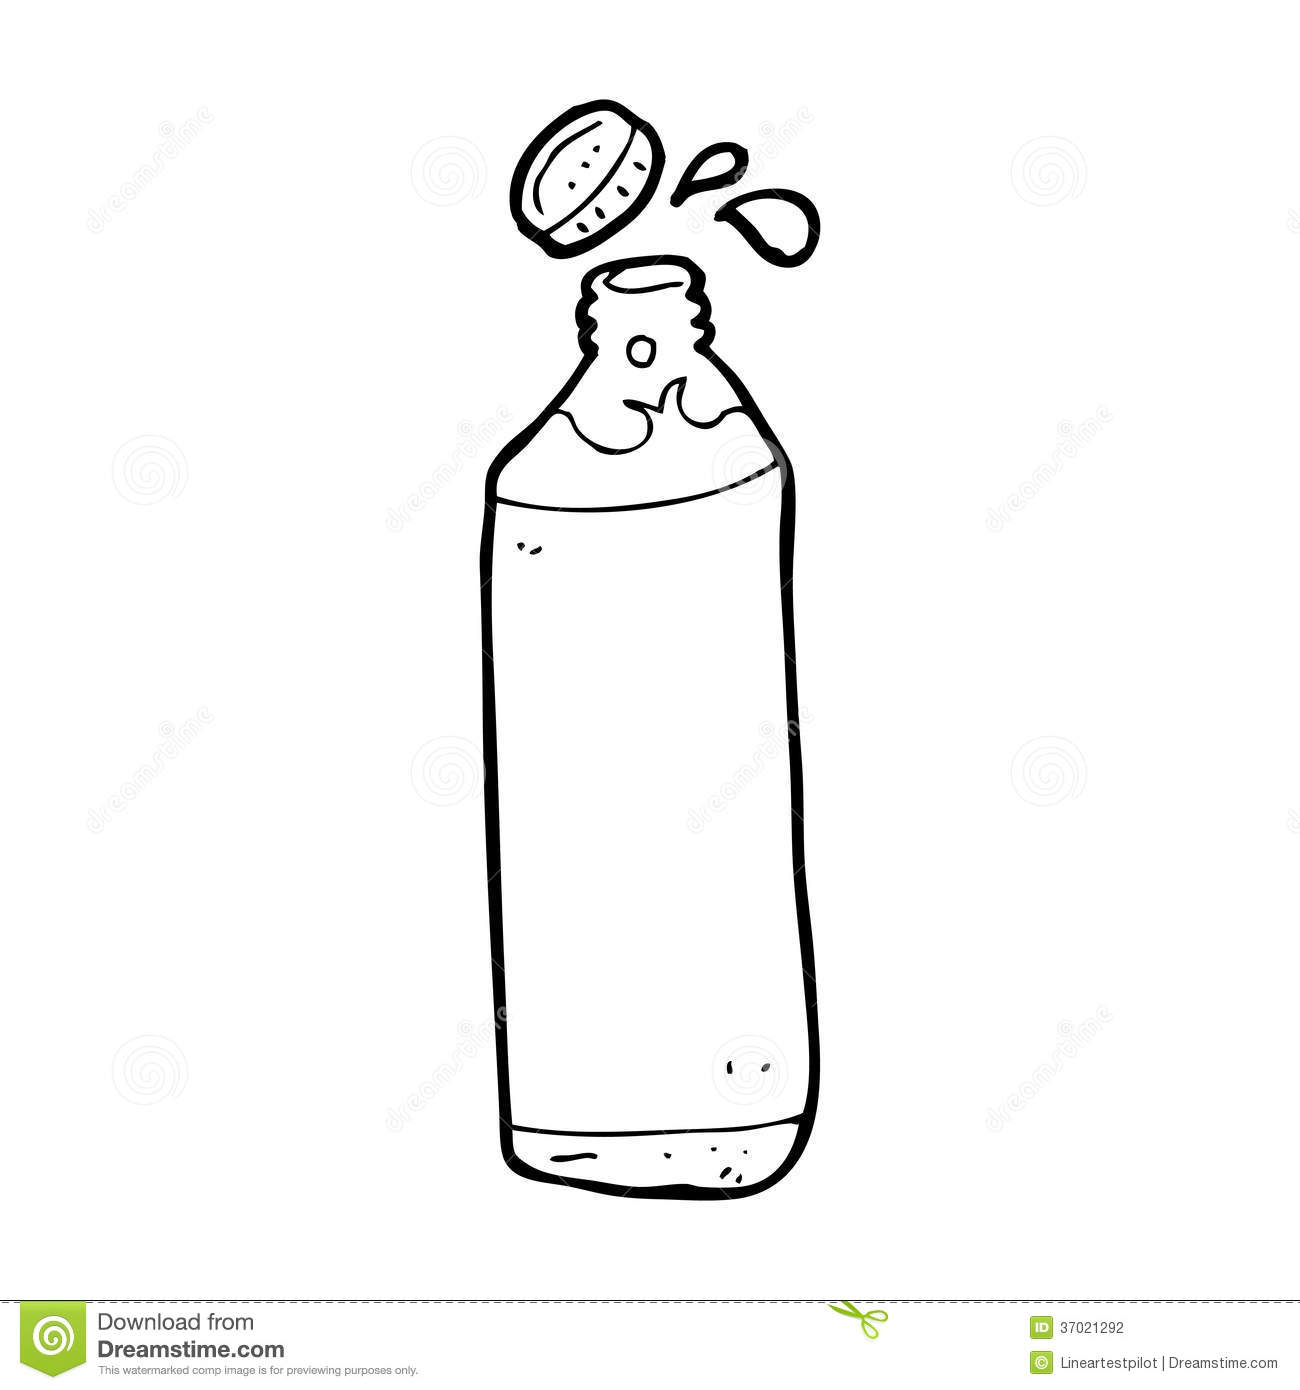 Water Bottle Clipart Black And White Cartoon Water Bottle